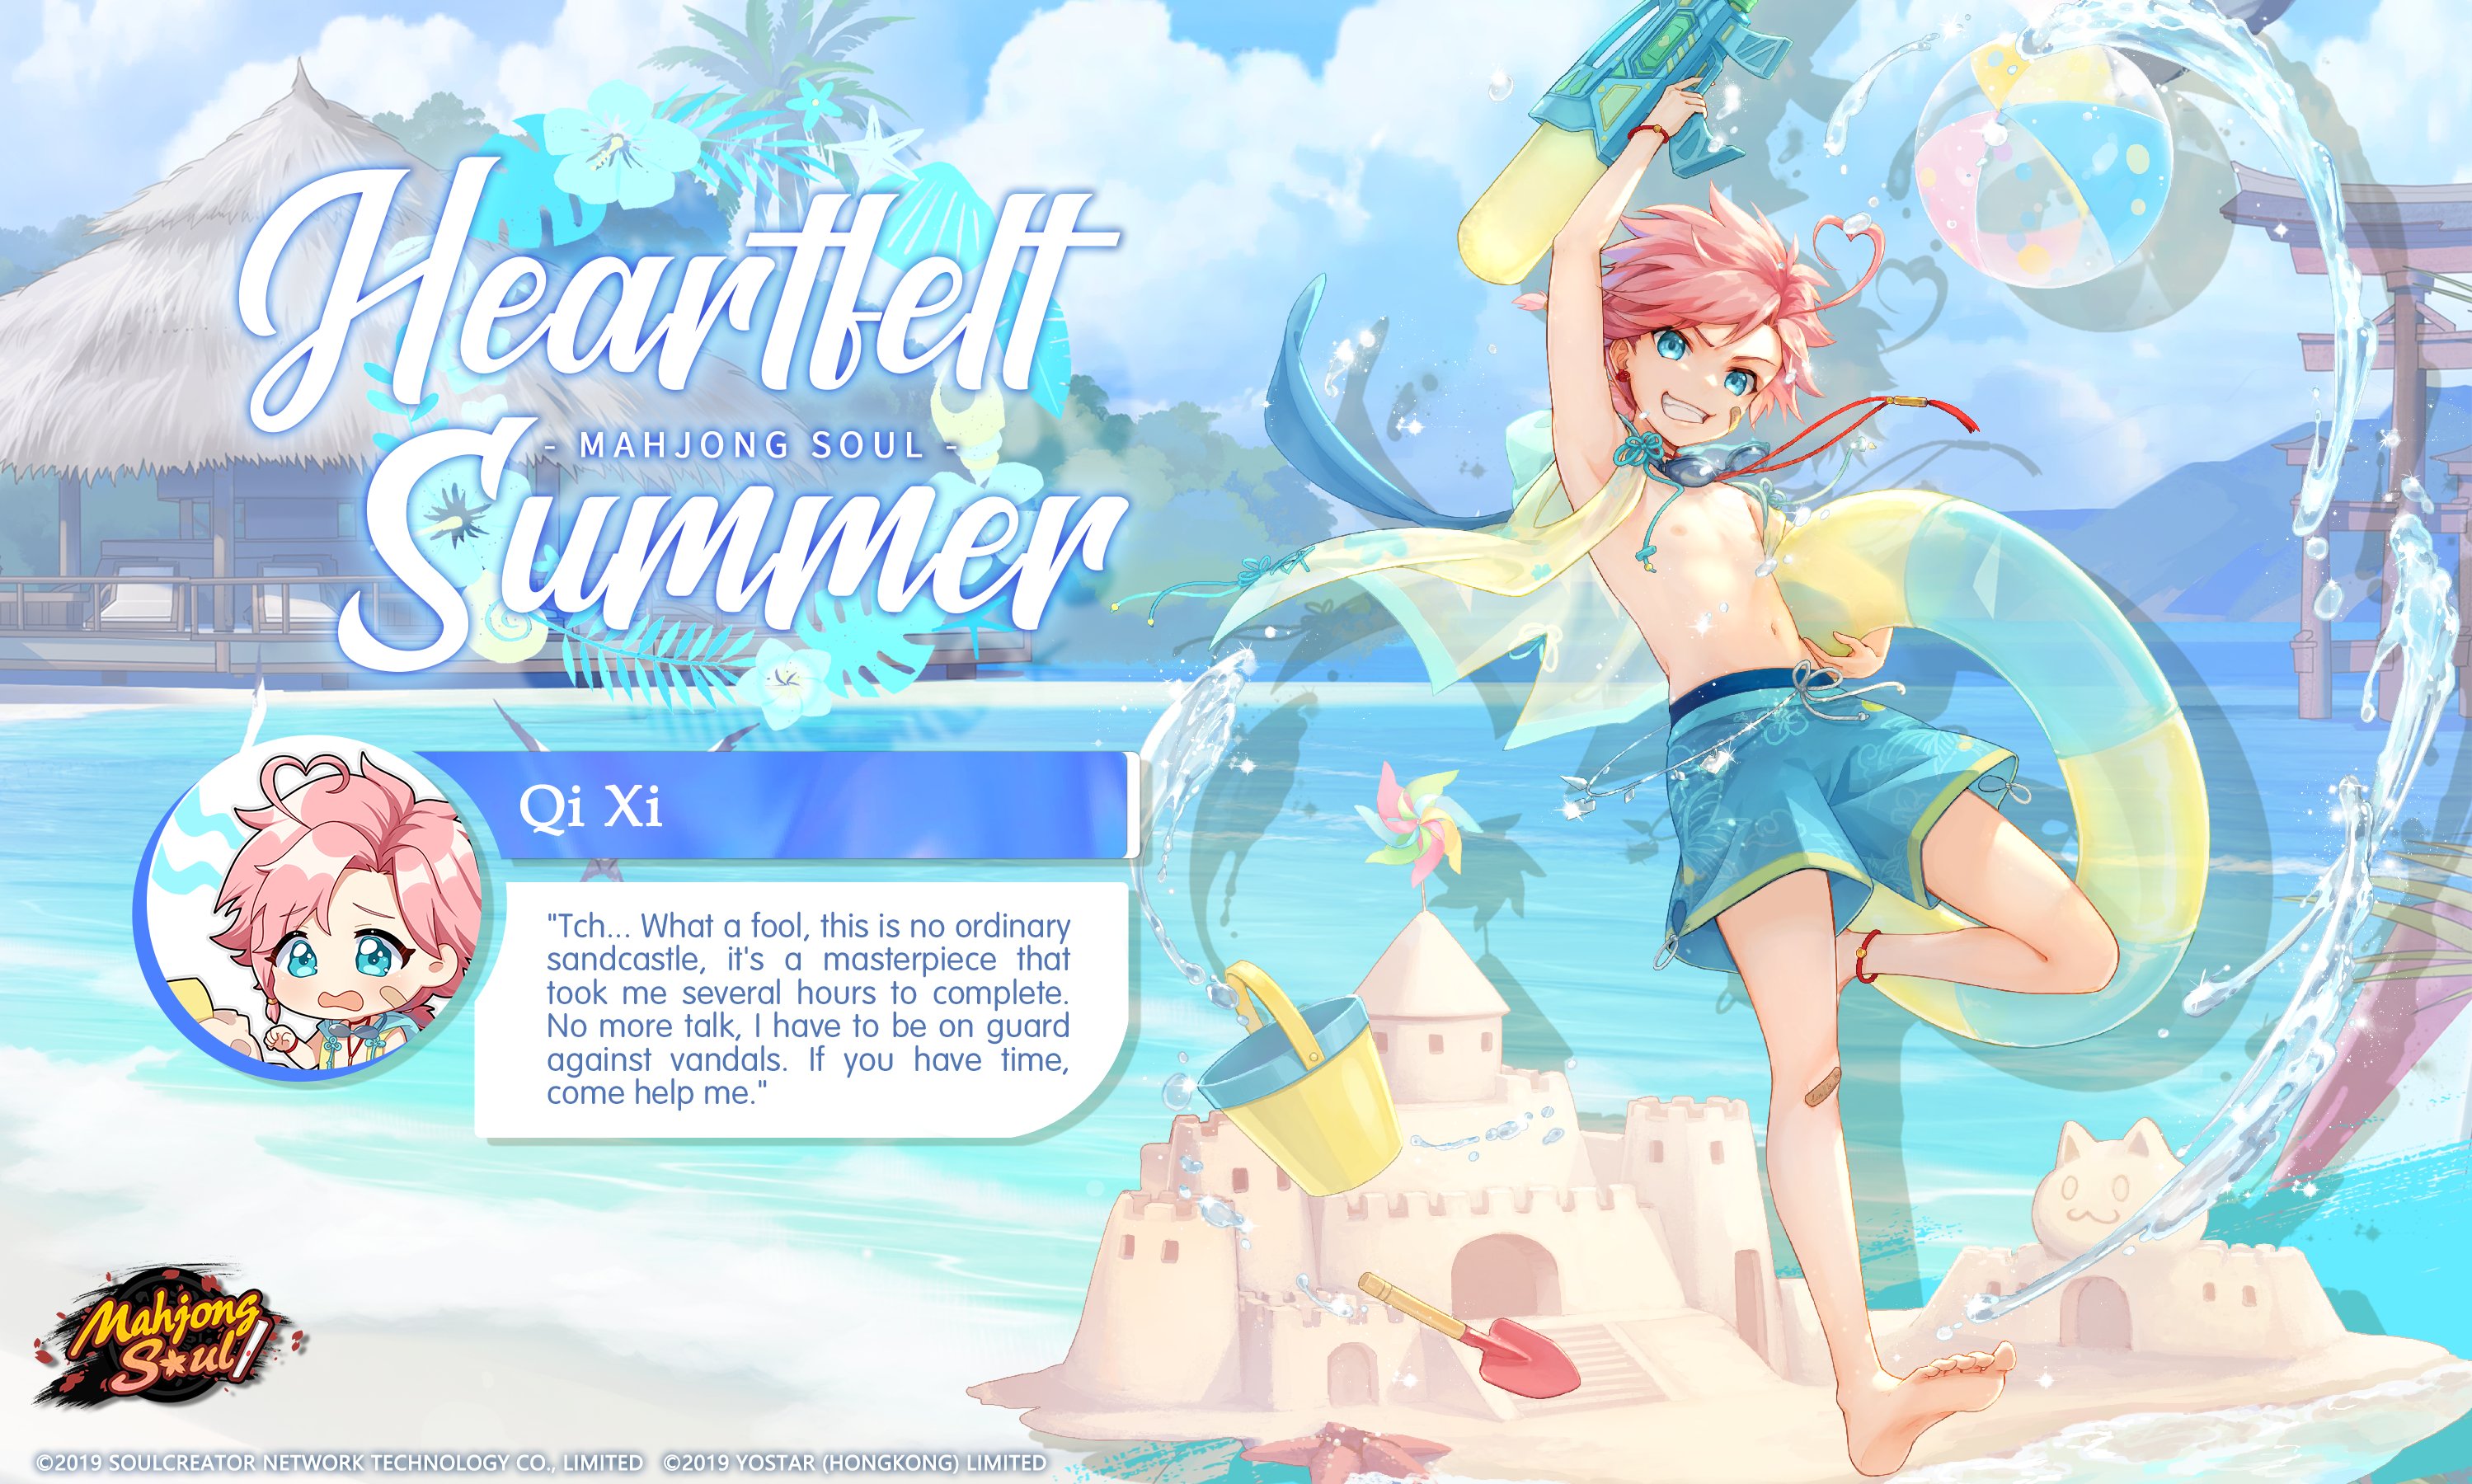 Mahjong Soul brings the Summer Festival event with new character